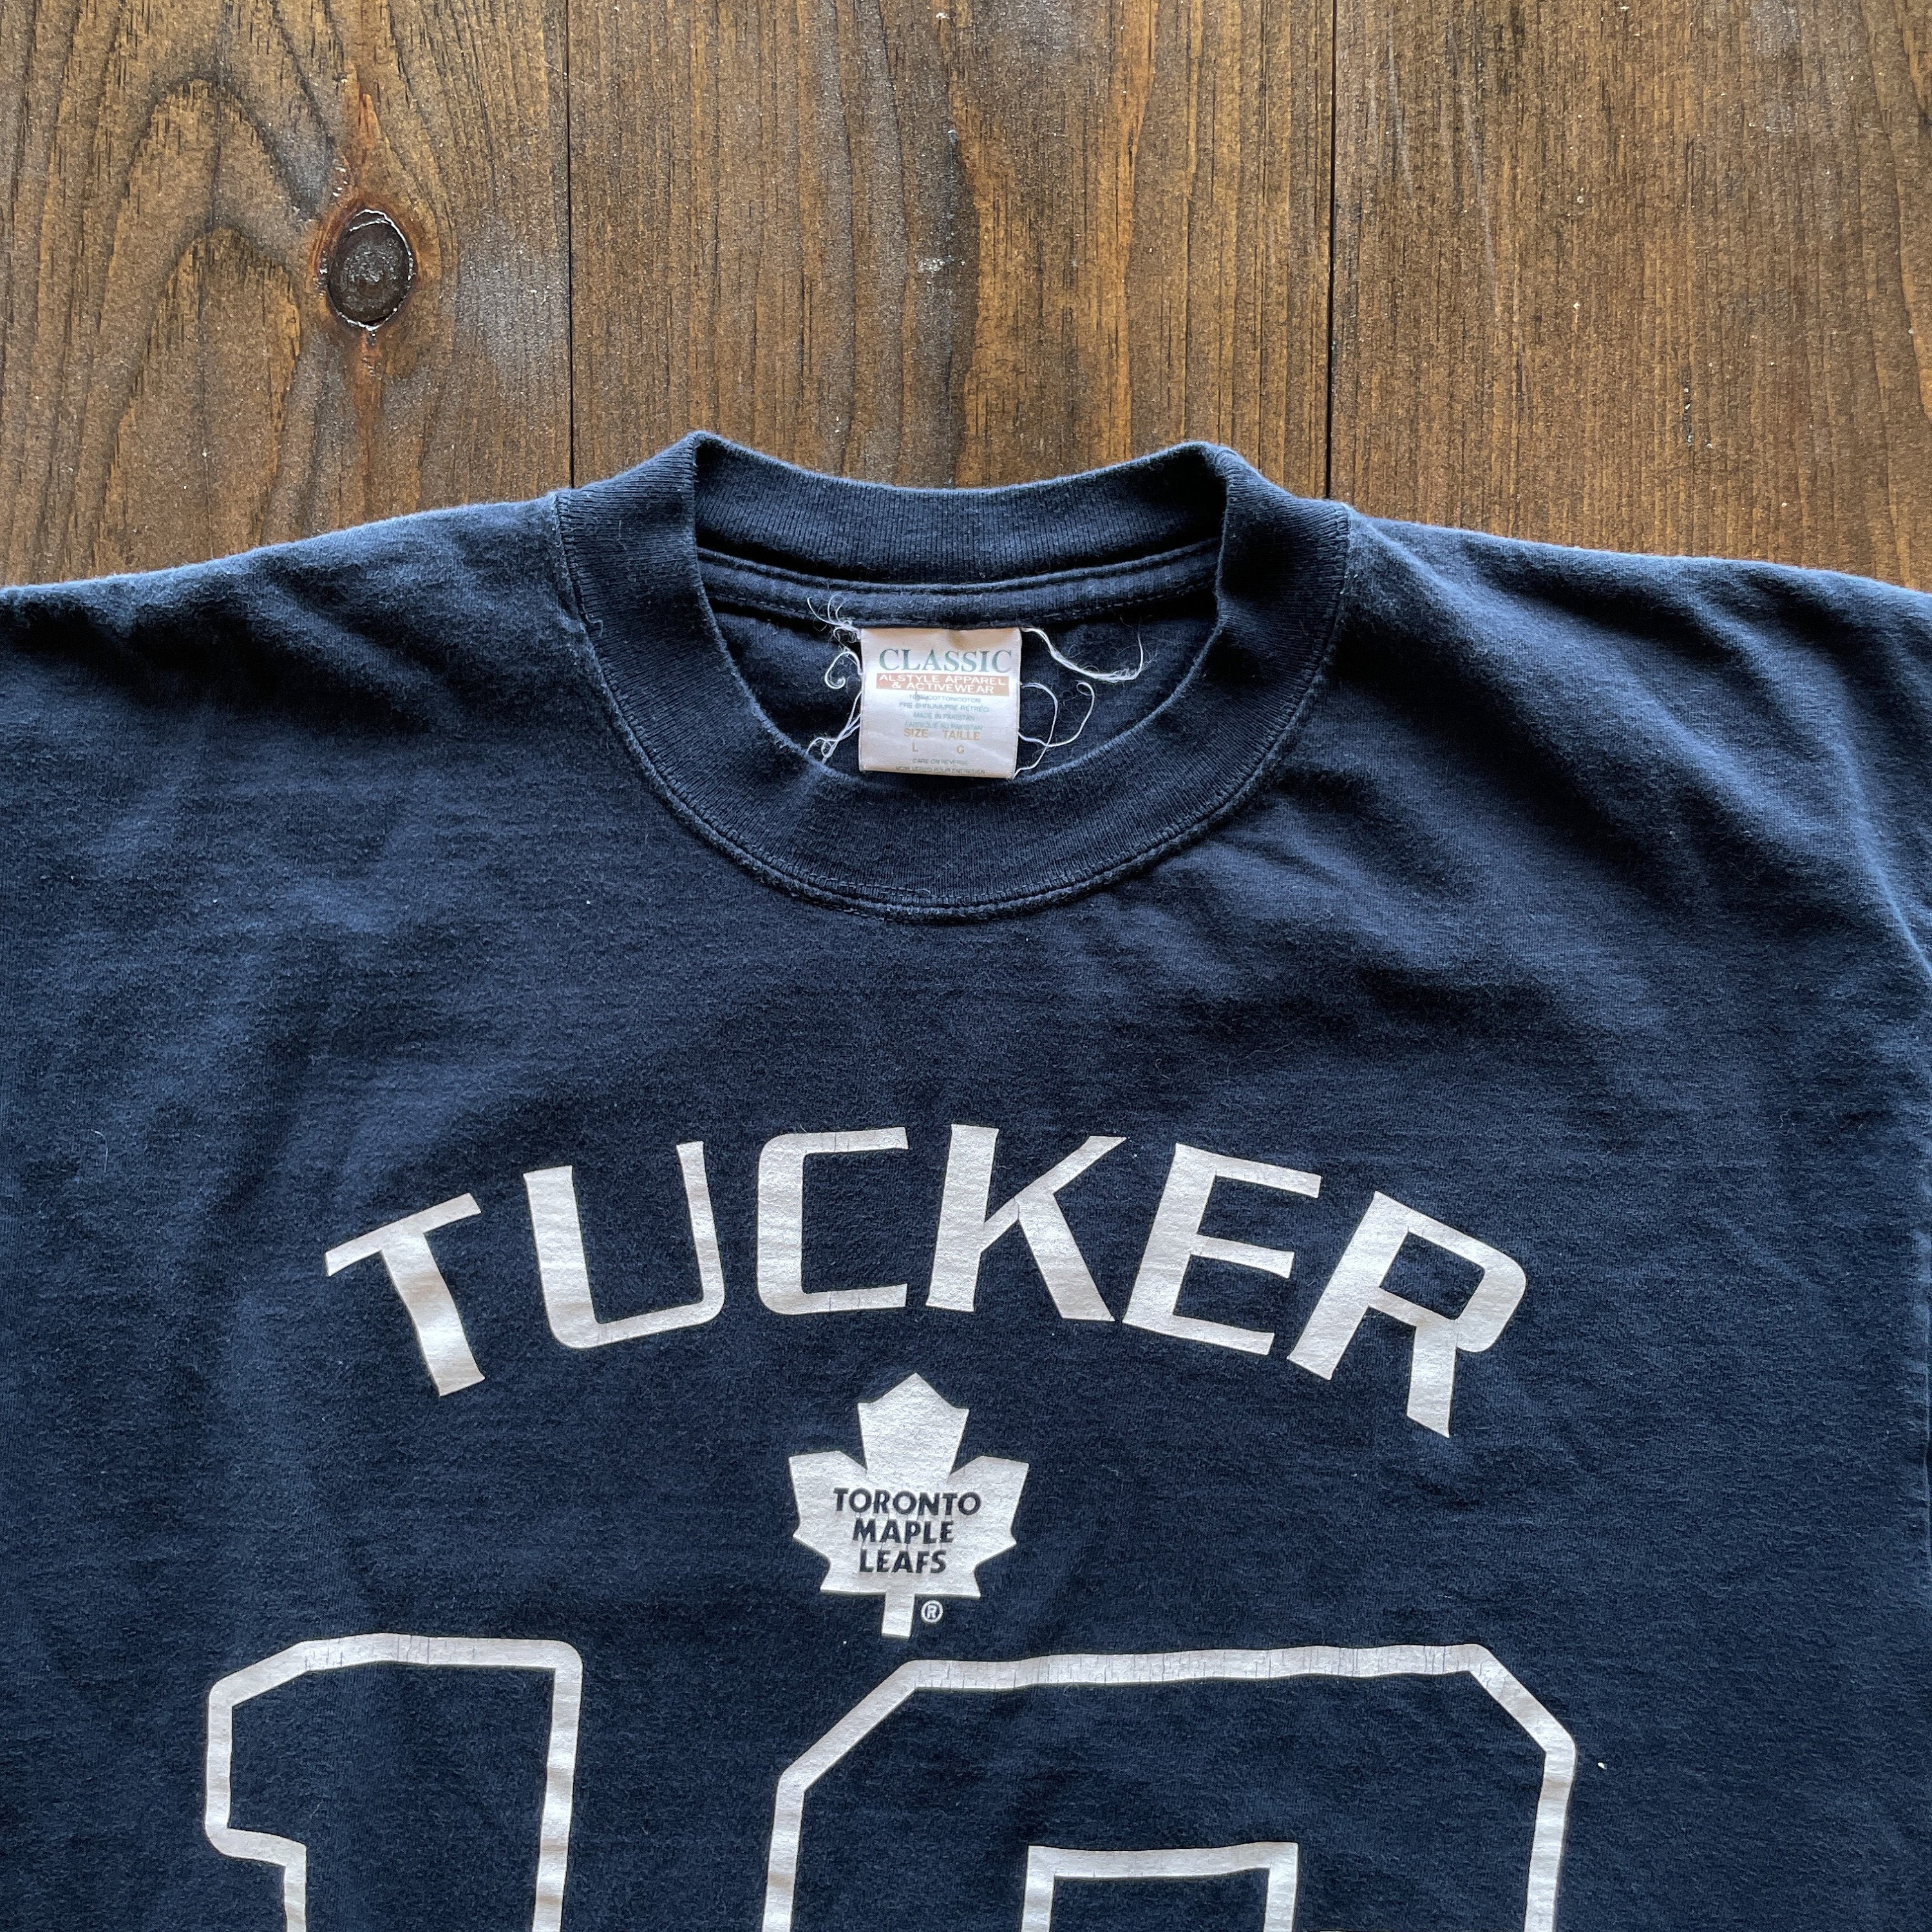 r/leafs by the numbers #16: Darcy Tucker was one of the most